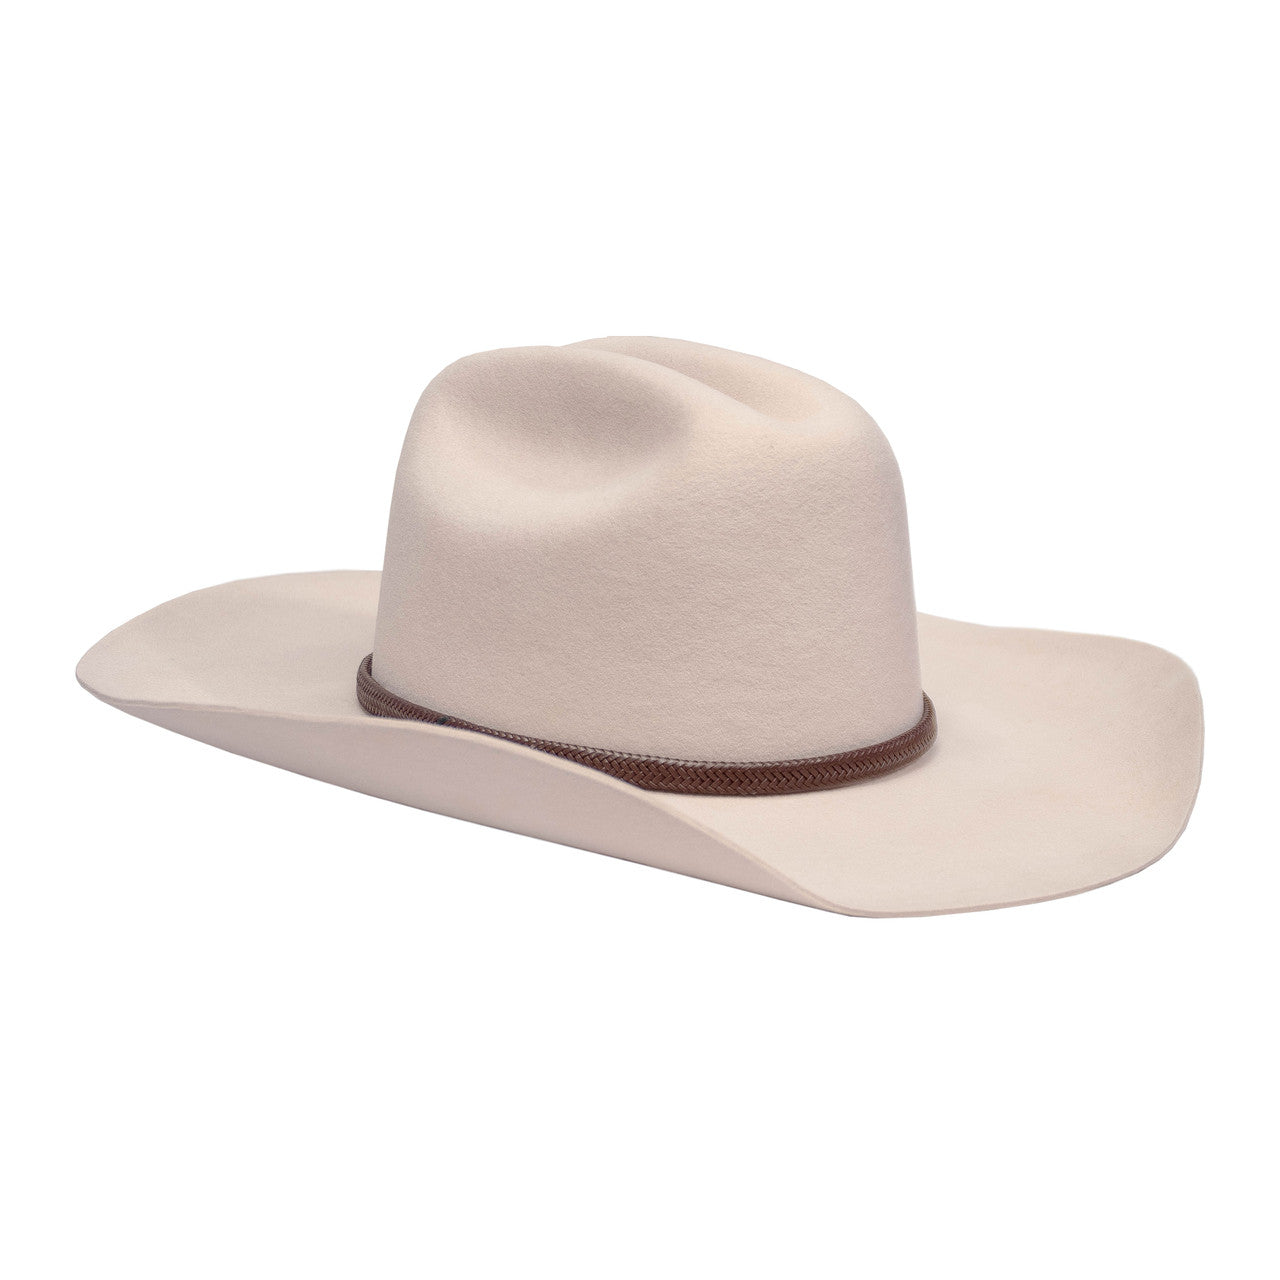 Saint Martin - "Cattleman" with Leather Band Cowboy Hat (Side)